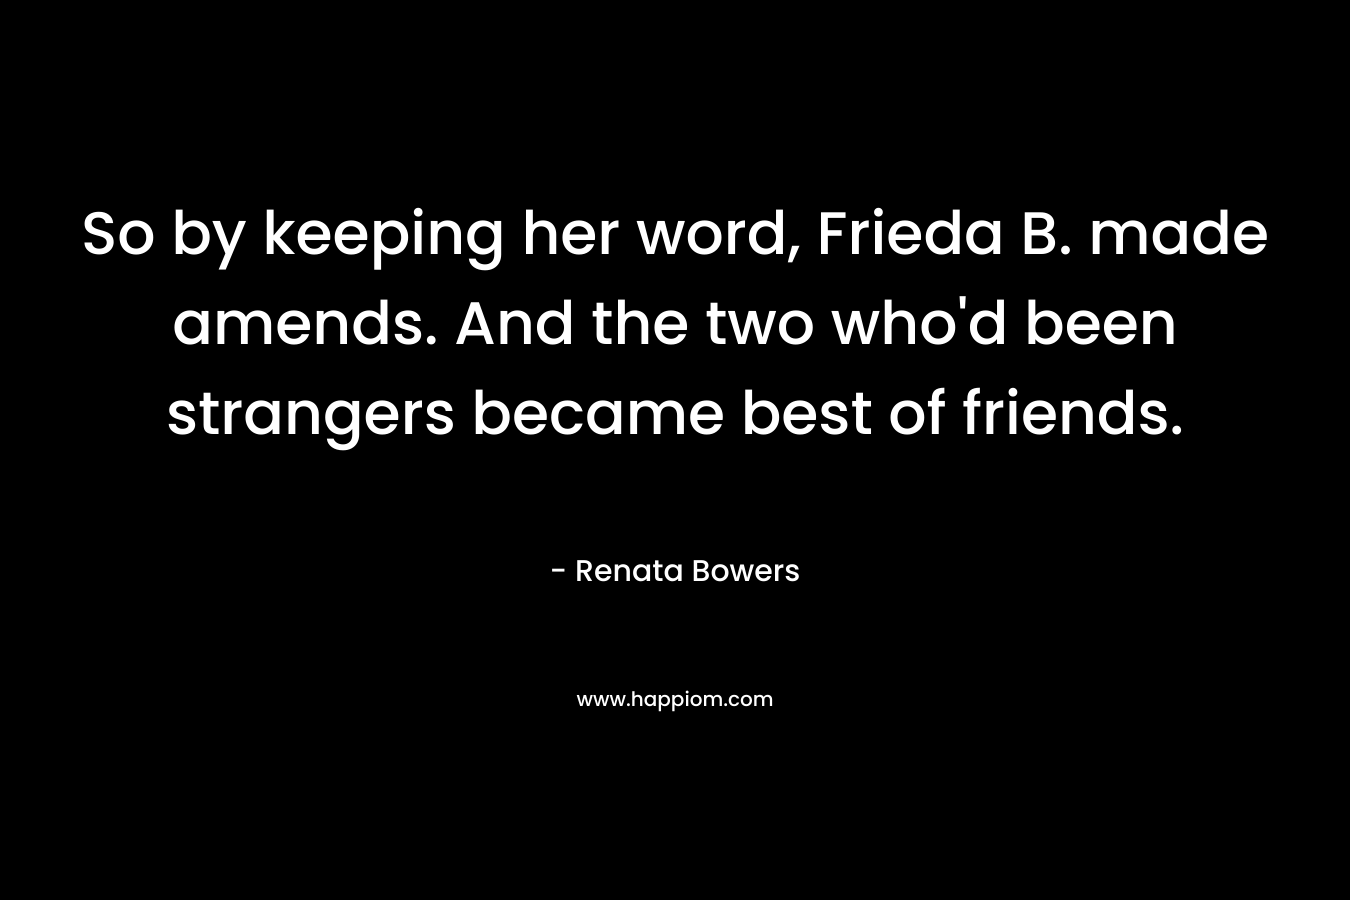 So by keeping her word, Frieda B. made amends. And the two who’d been strangers became best of friends. – Renata Bowers